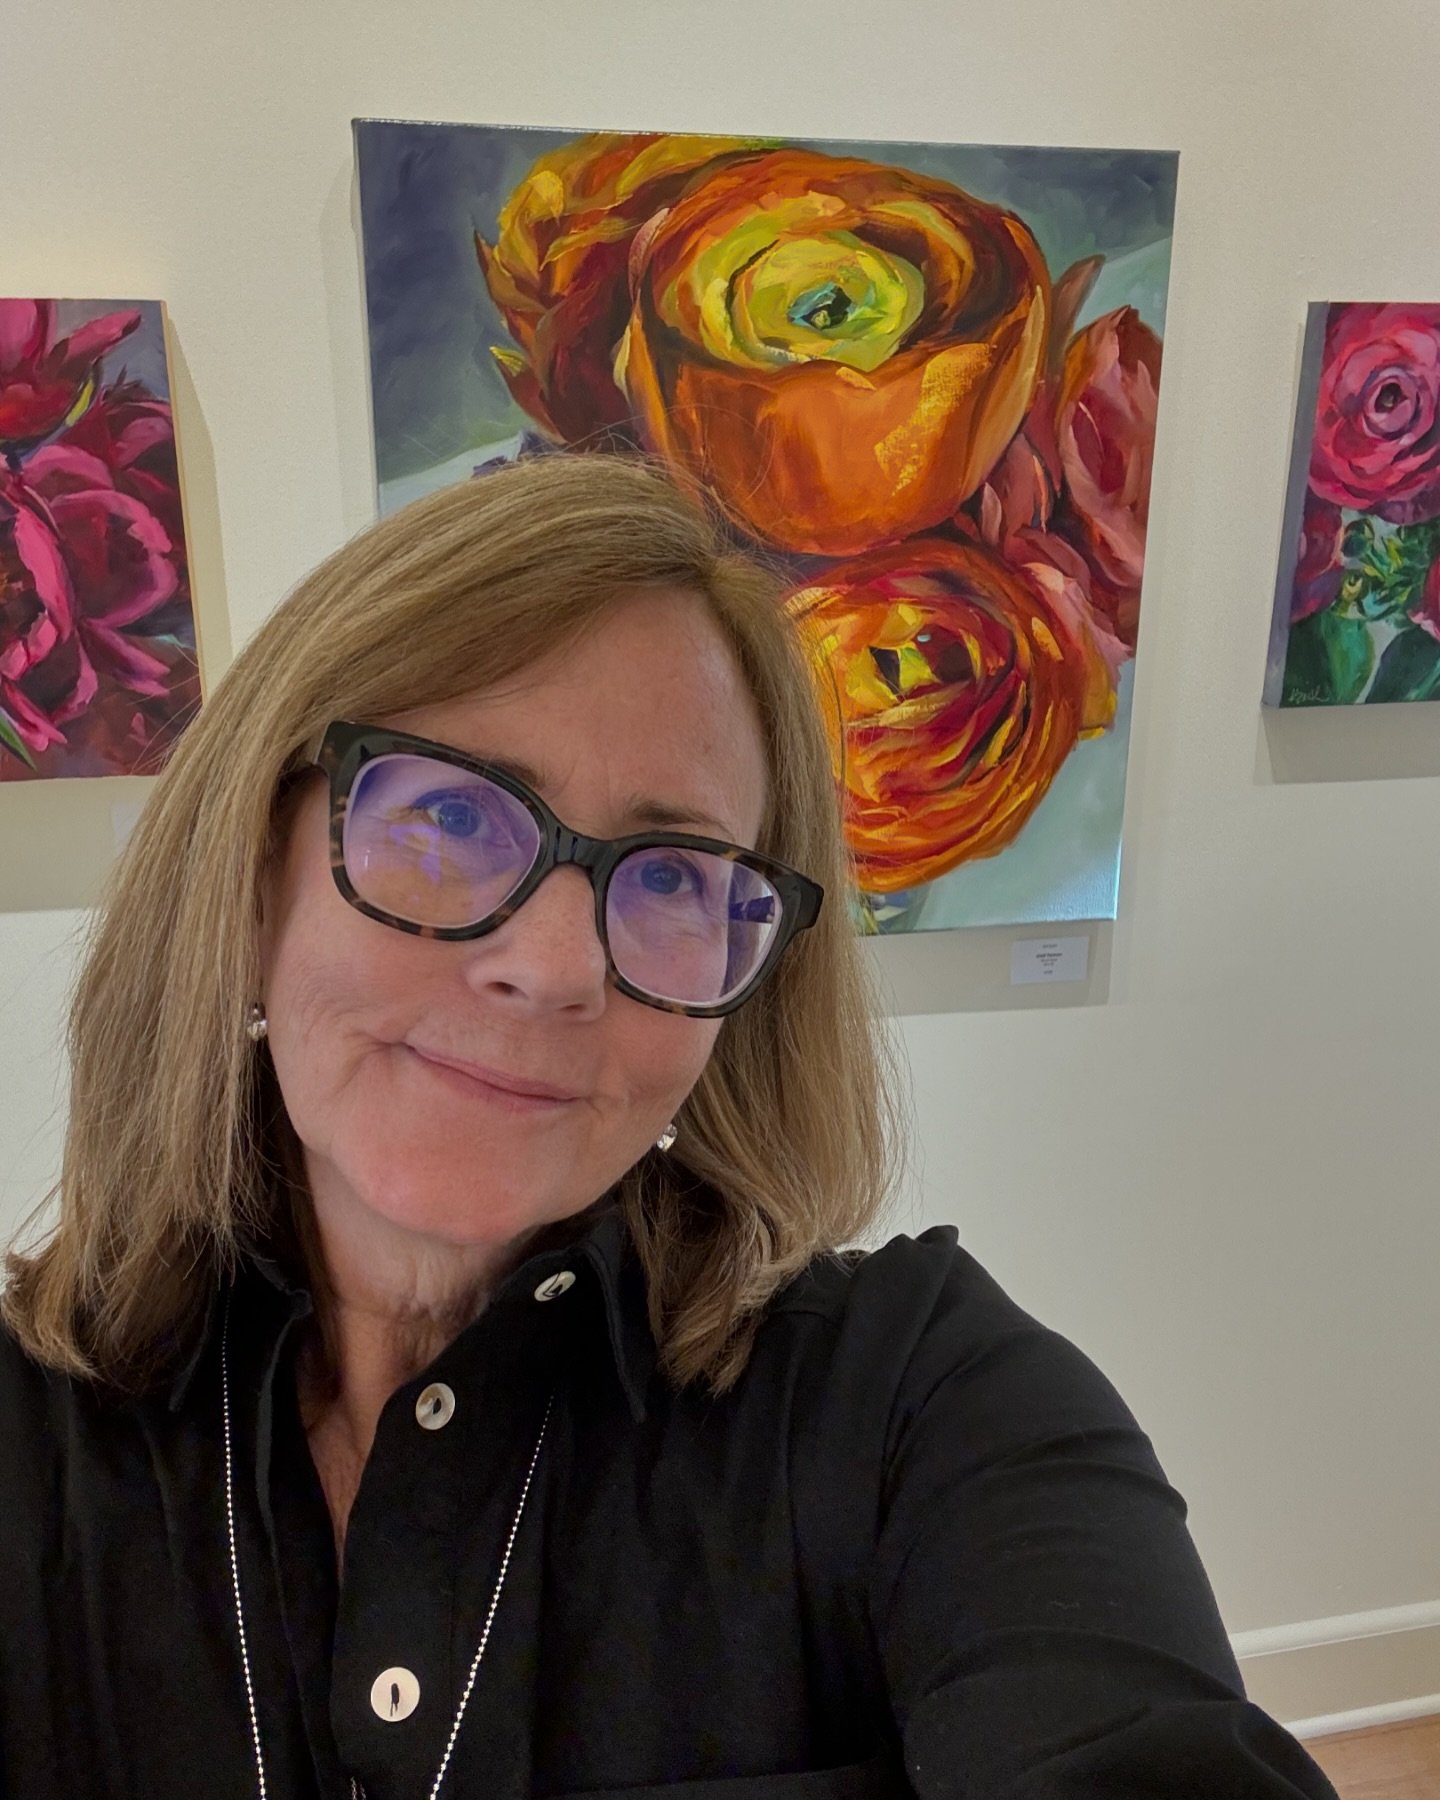 Come visit me! I&rsquo;ll be @redravenartcompany Friday night until 8 pm and Saturday I&rsquo;ll be painting live from 11am-3pm. I would love to see you! #dowhatyoulove #inspiringart #downtownlancaster #lancasterartwalk